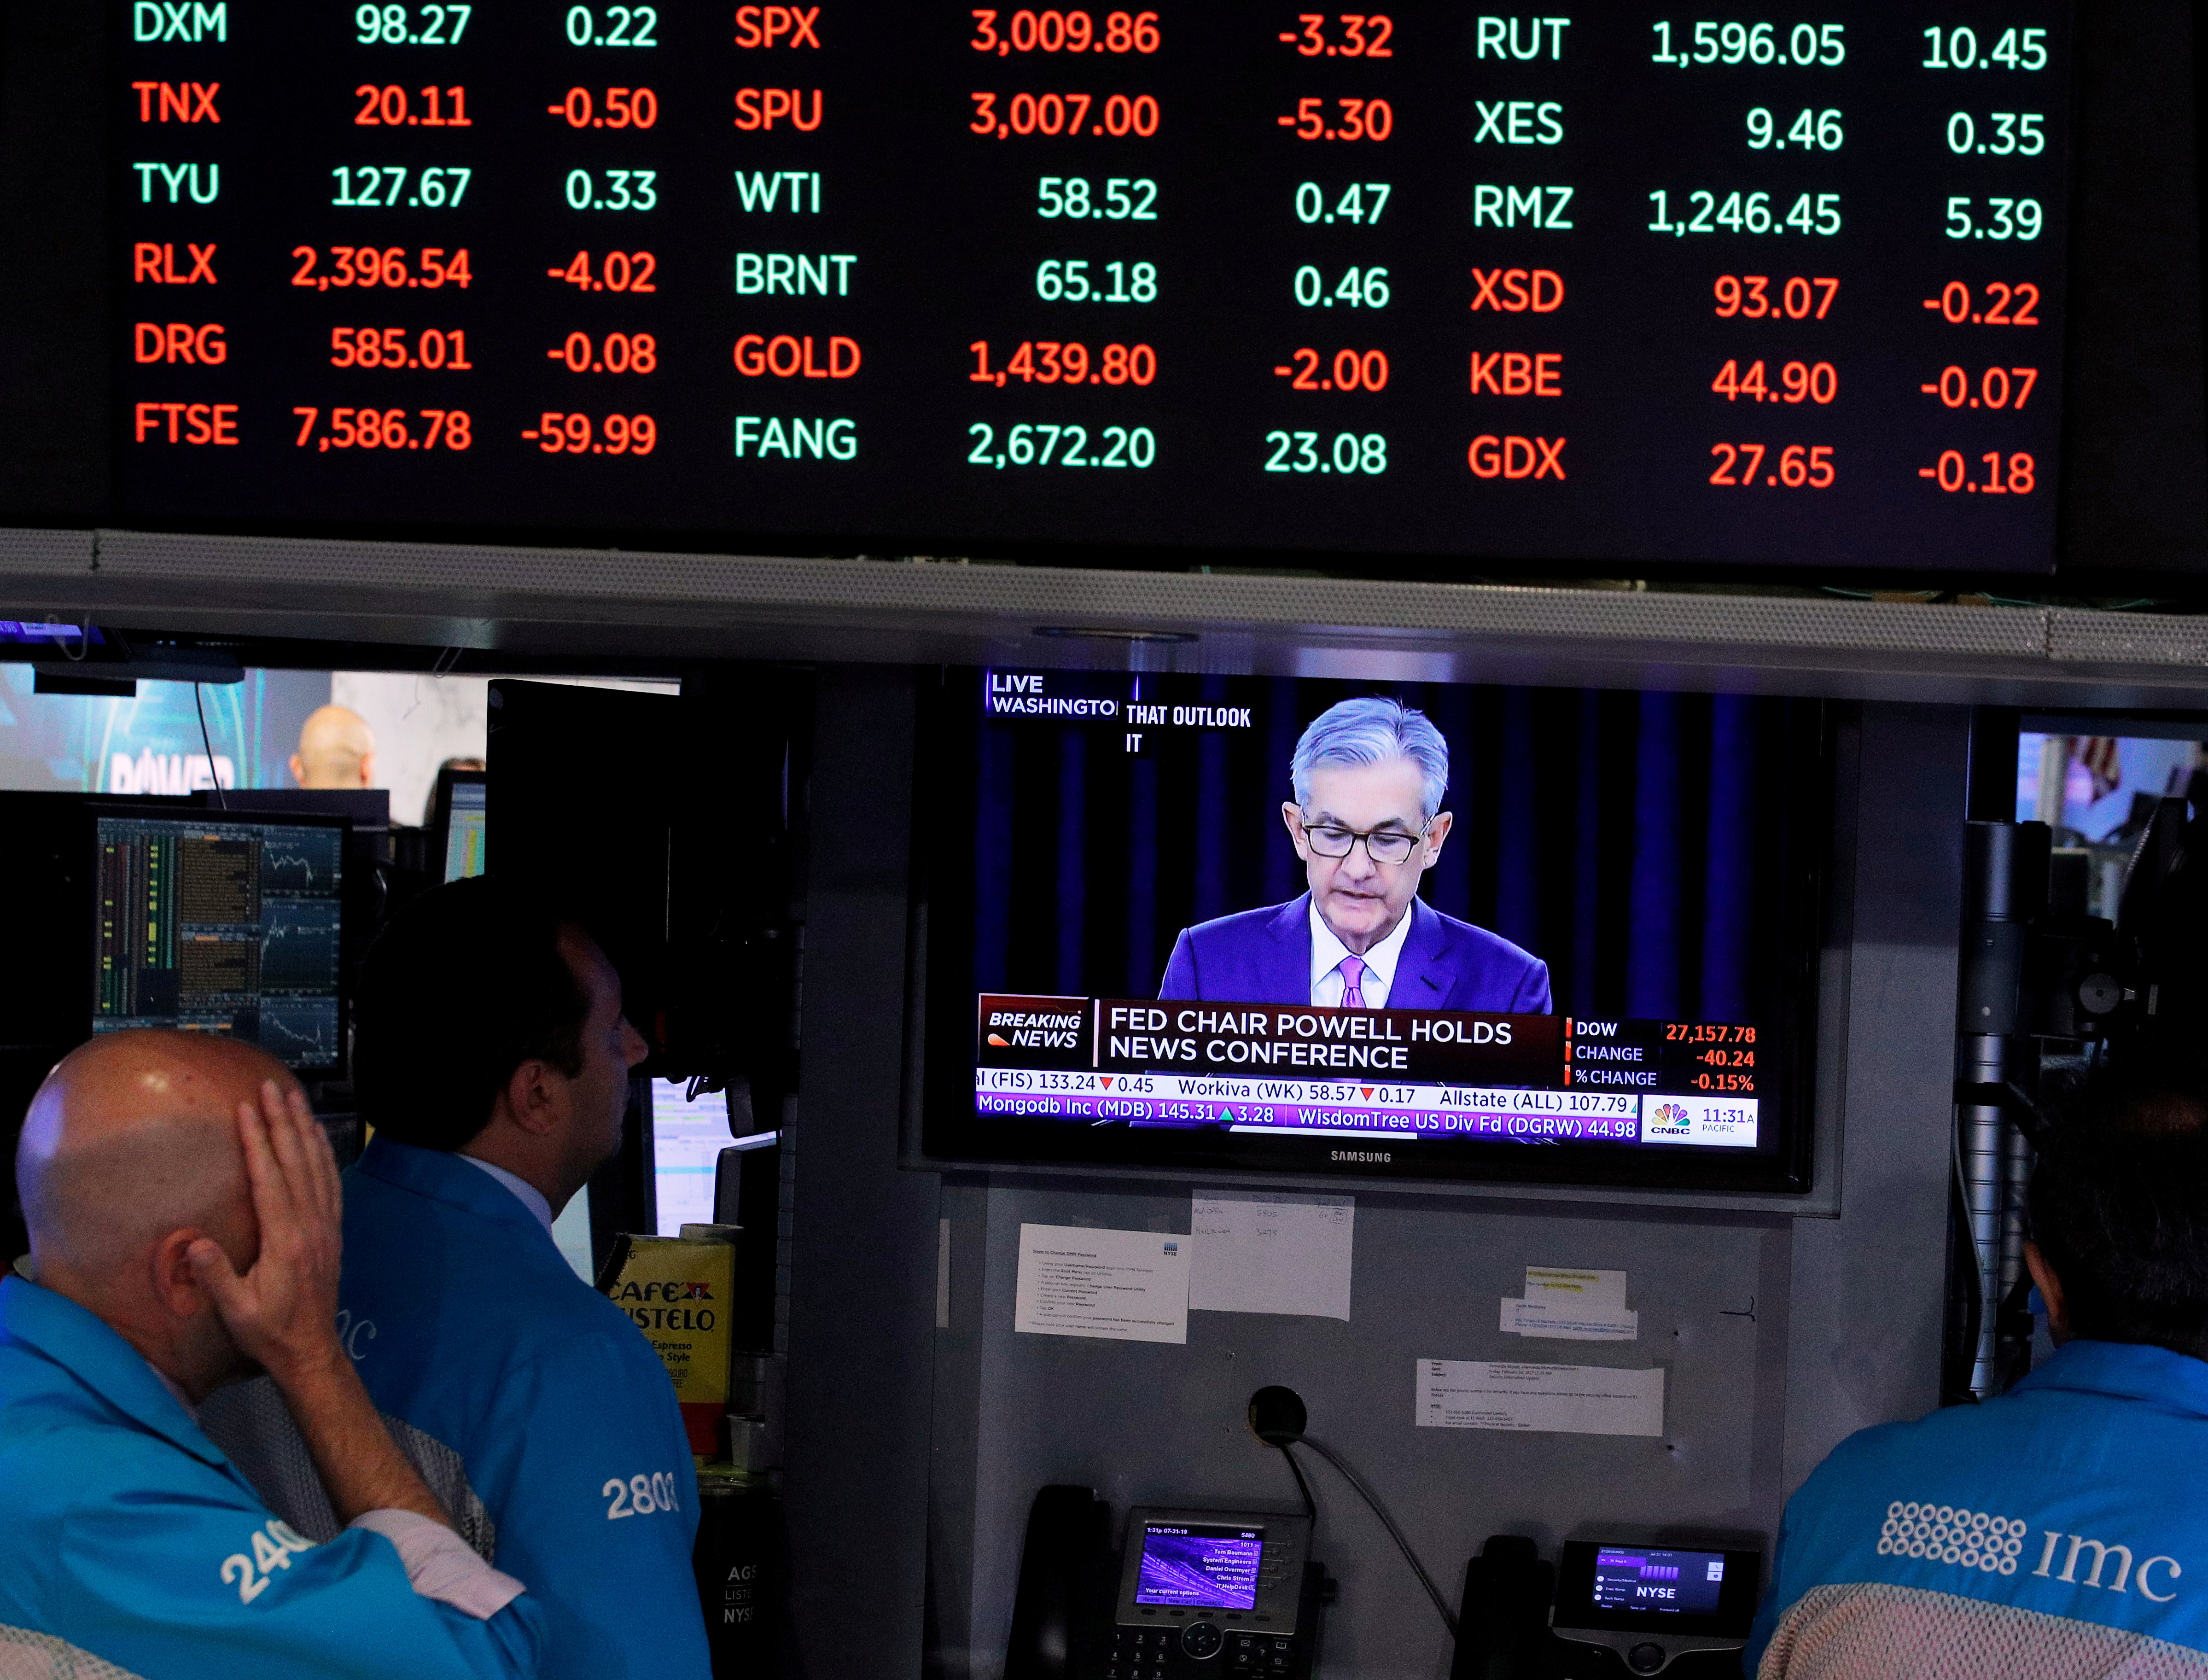 Traders look on as a screen shows Federal Reserve Chairman Jerome Powell's news conference after the U.S. Federal Reserve interest rates announcement on the floor of the New York Stock Exchange (NYSE) in New York, U.S., July 31, 2019. REUTERS/Brendan McDermid/File Photo